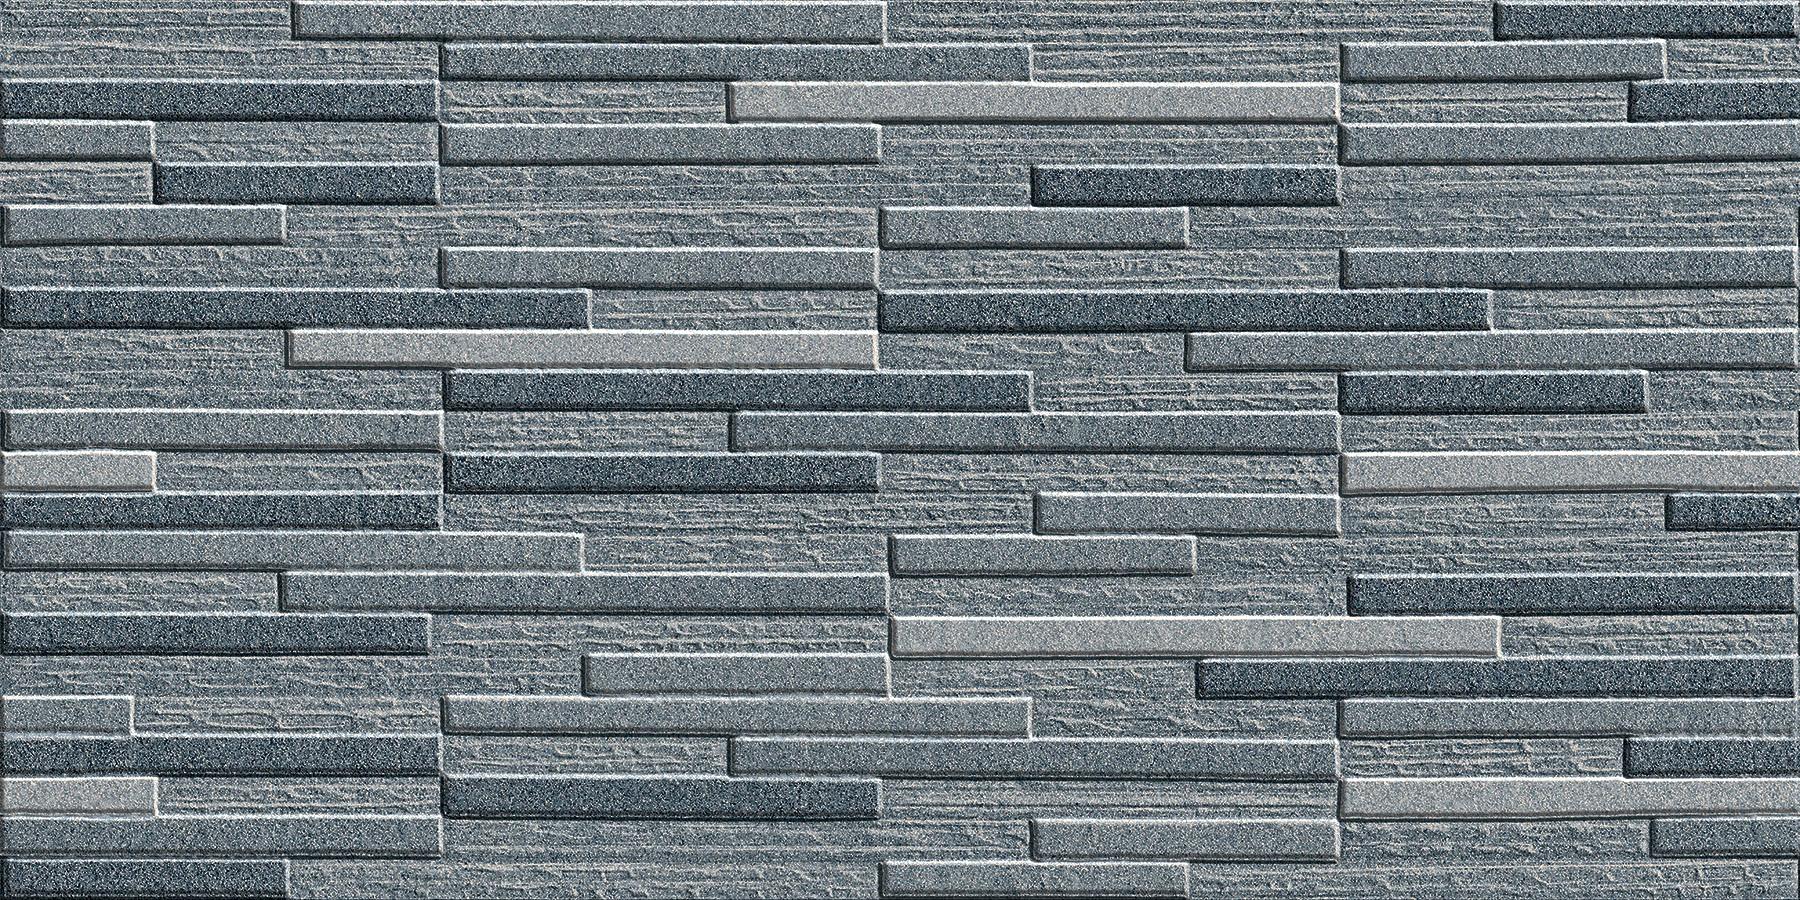 Elevation Tiles for Bathroom Tiles, Living Room Tiles, Elevation Tiles, Accent Tiles, Hospital Tiles, Commercial/Office, Outdoor Area, School & Collages